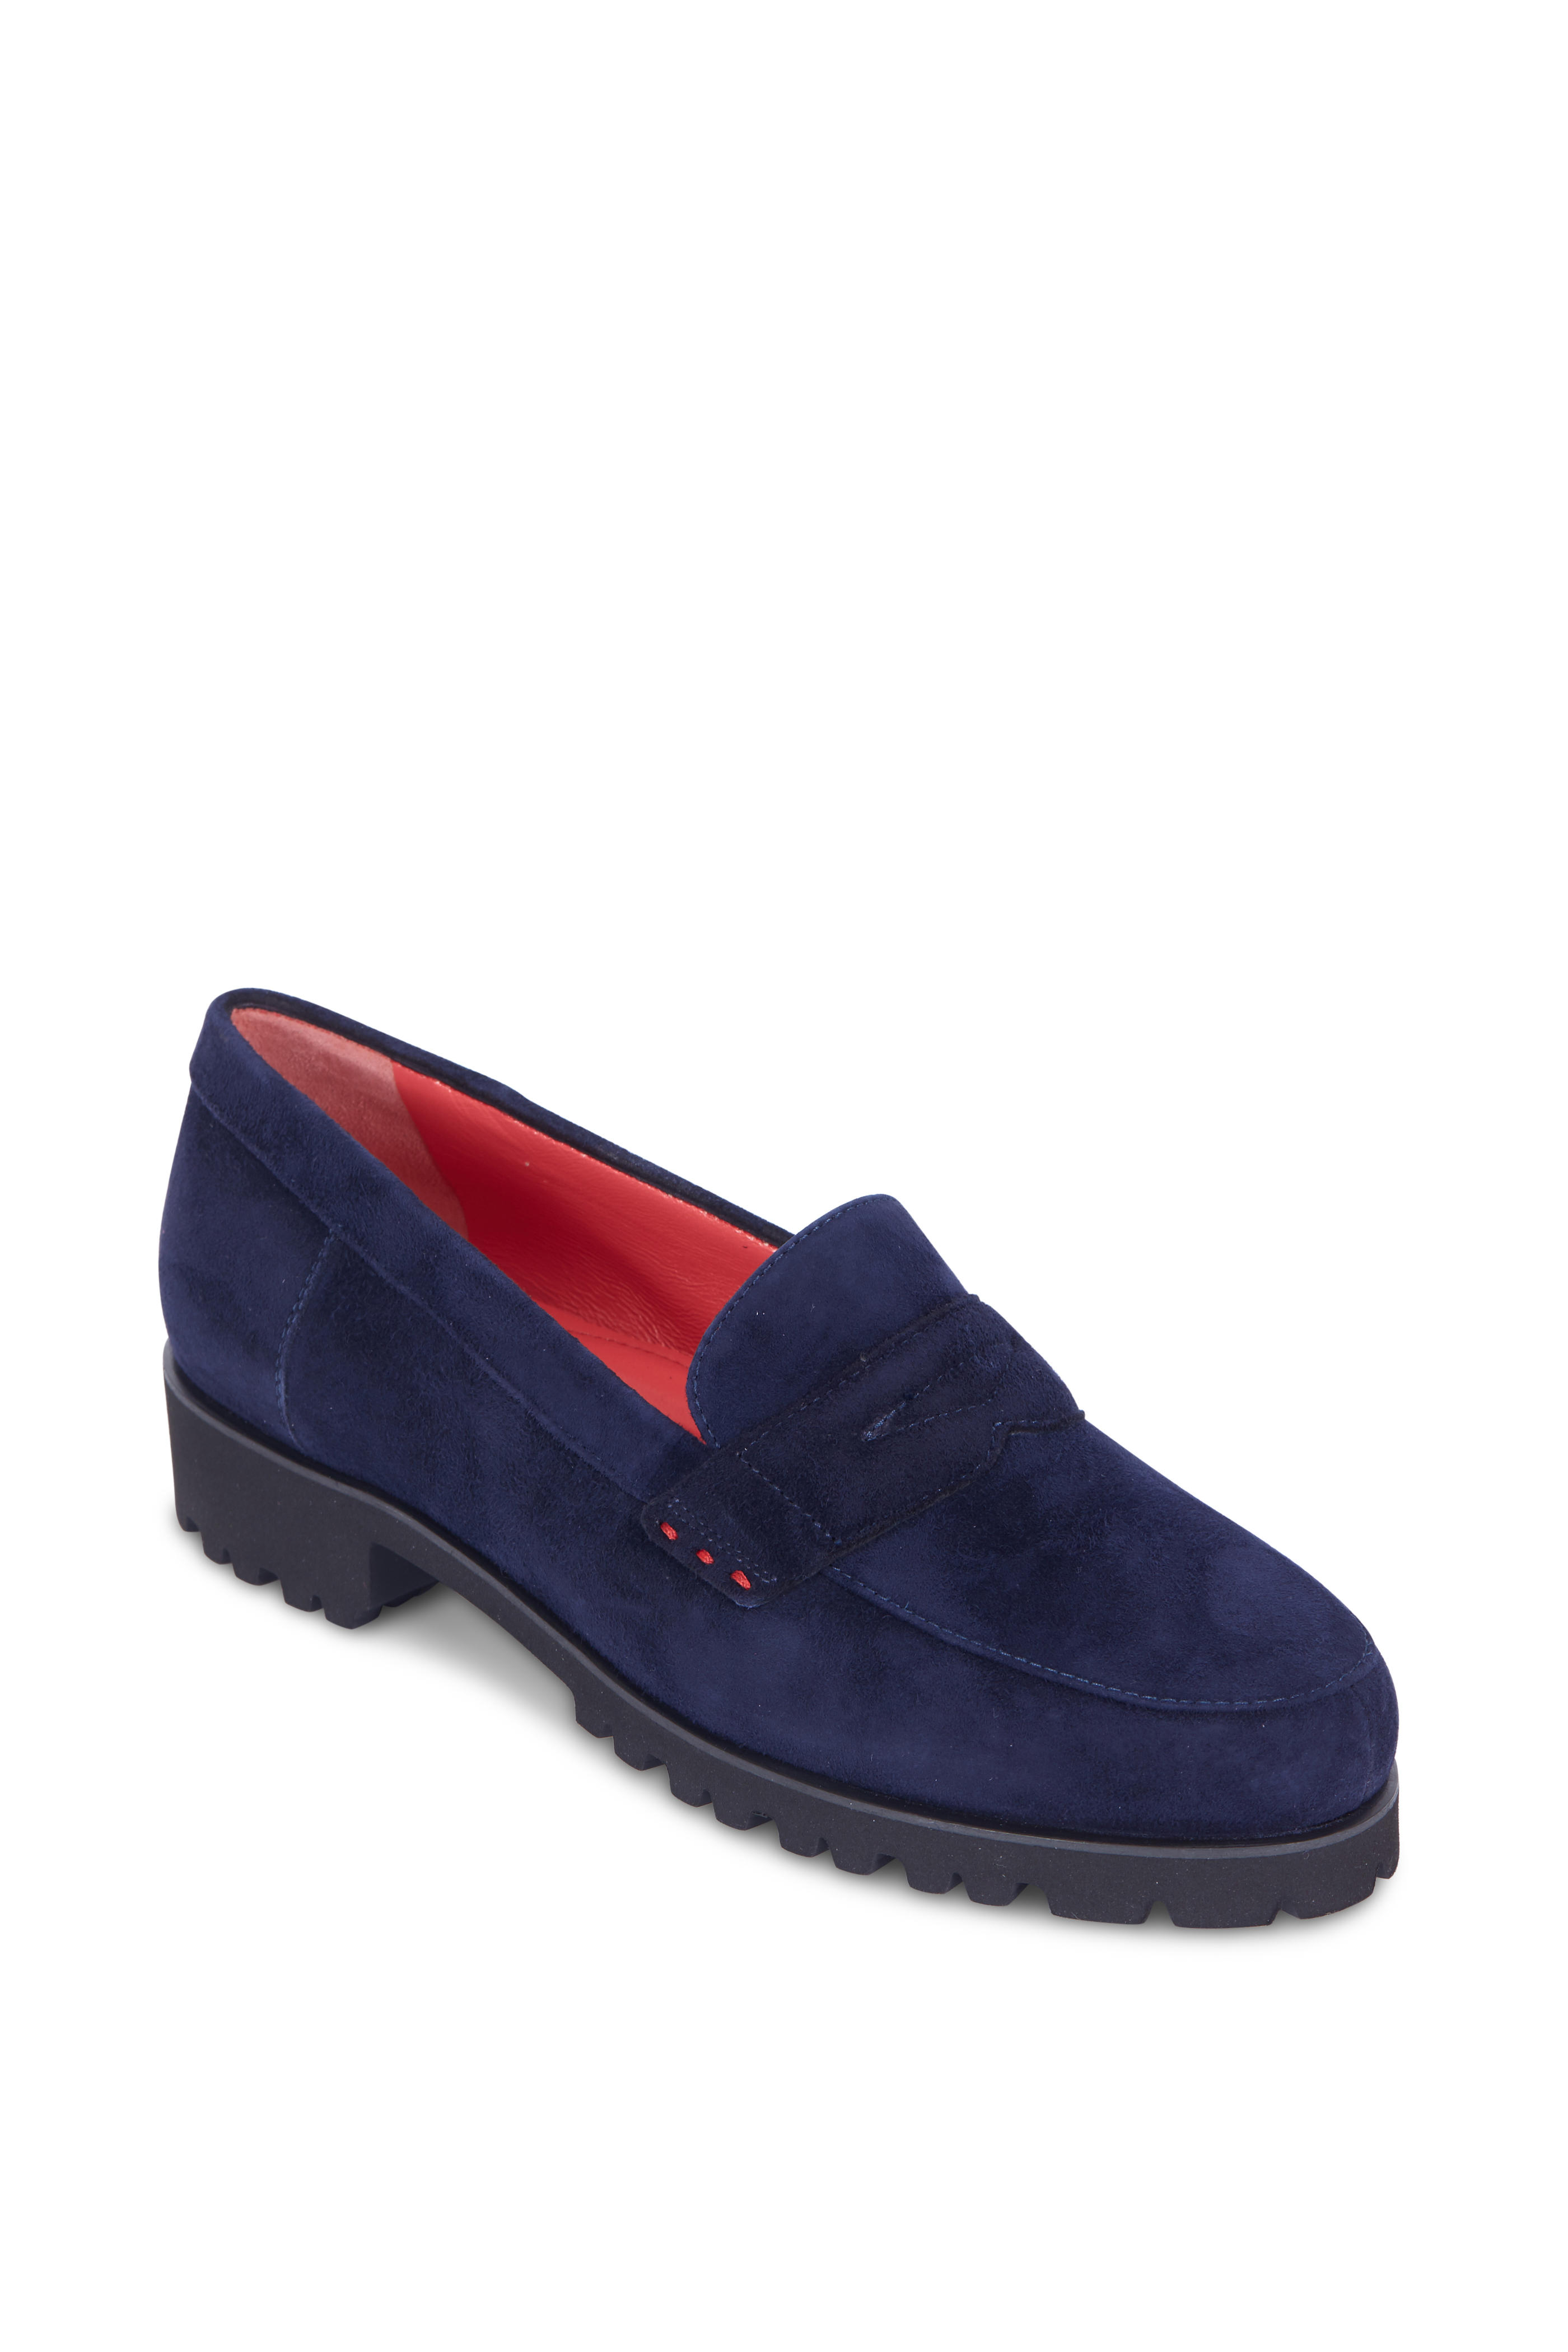 rubber sole penny loafers